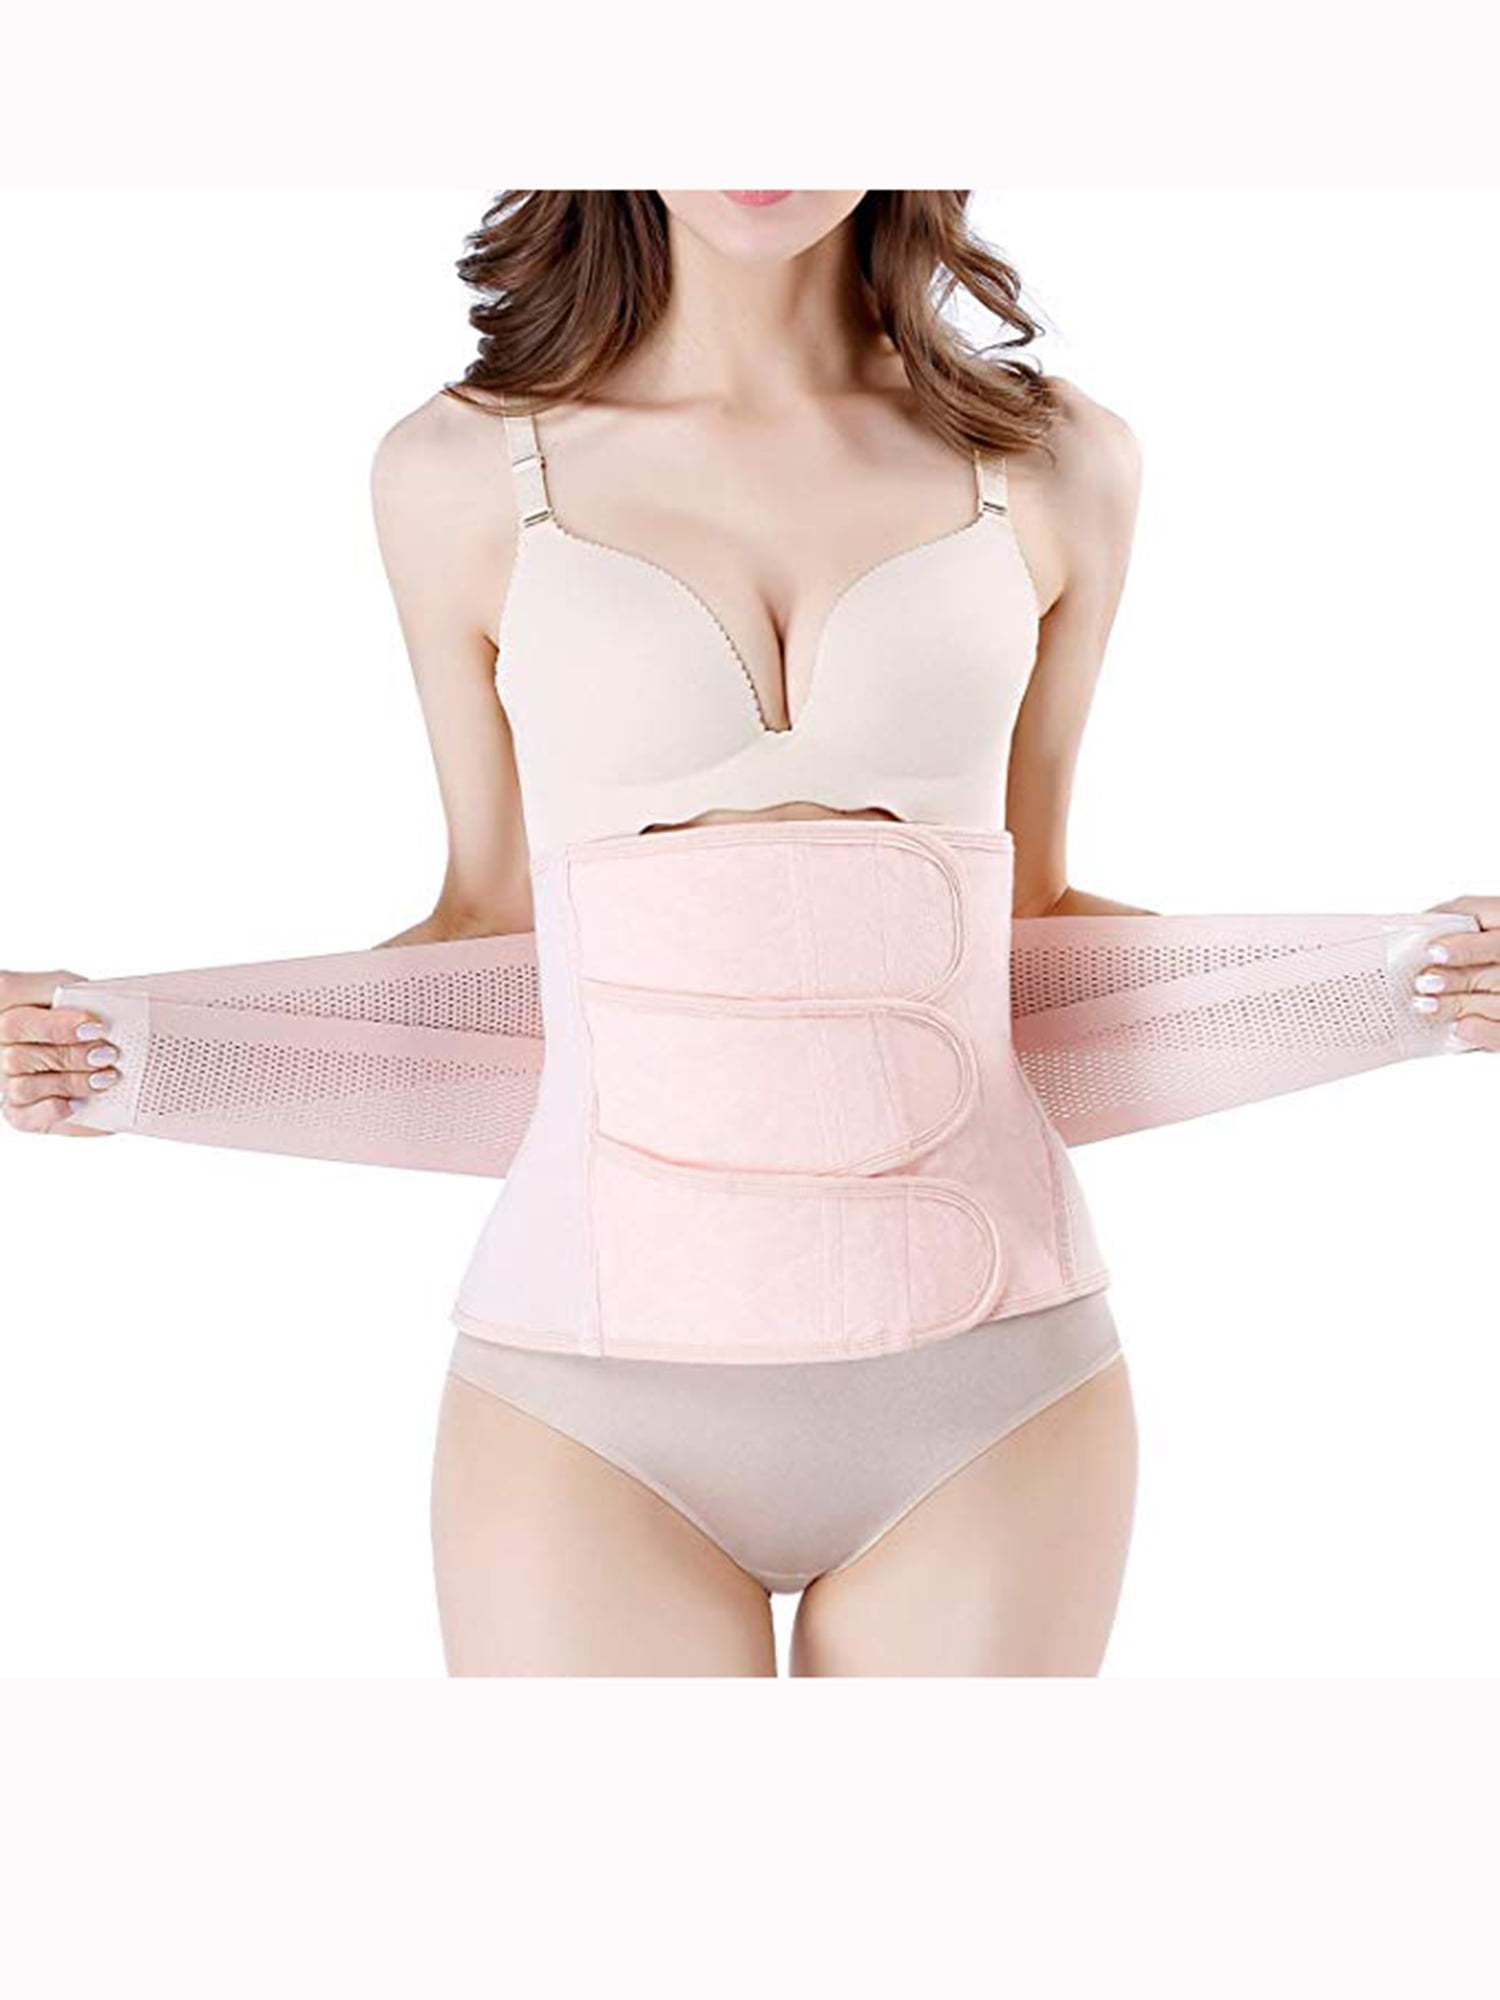 LadiesPostpartum Belt Belly Wrap Body Shaper Support Recovery Girdle After Birth 